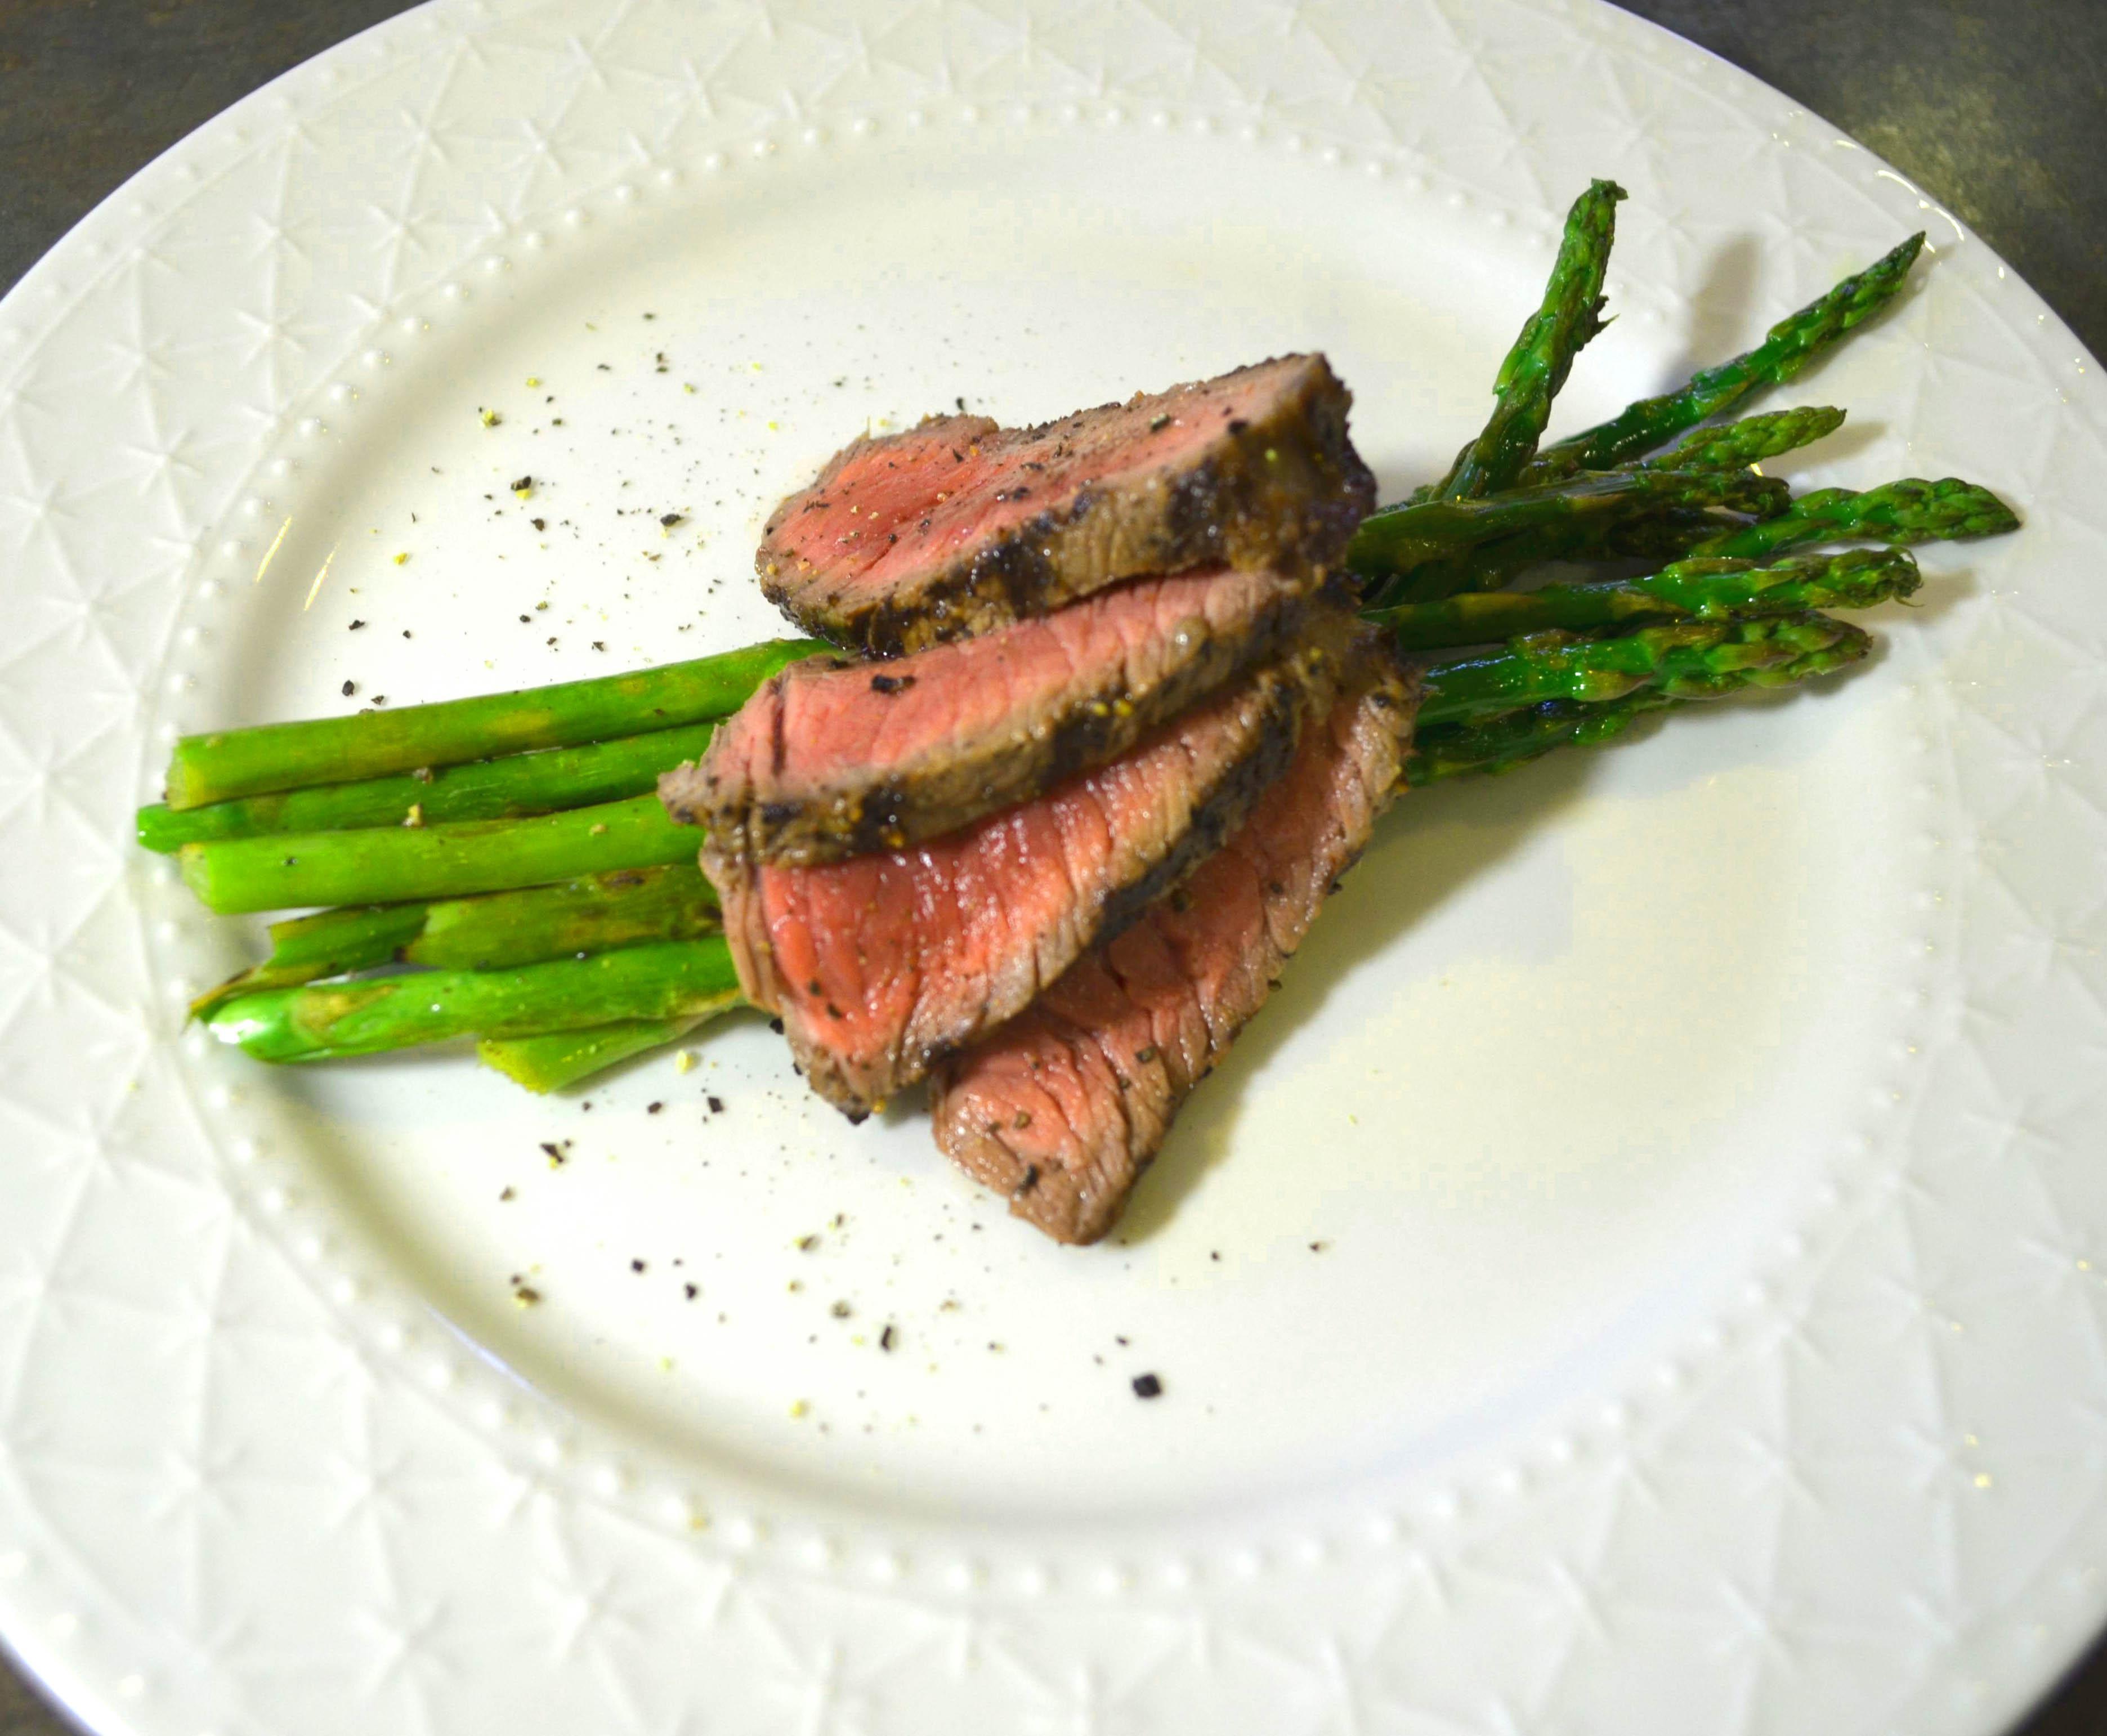 herb-marninated, grilled buffalo steak over asparagus on a white plate